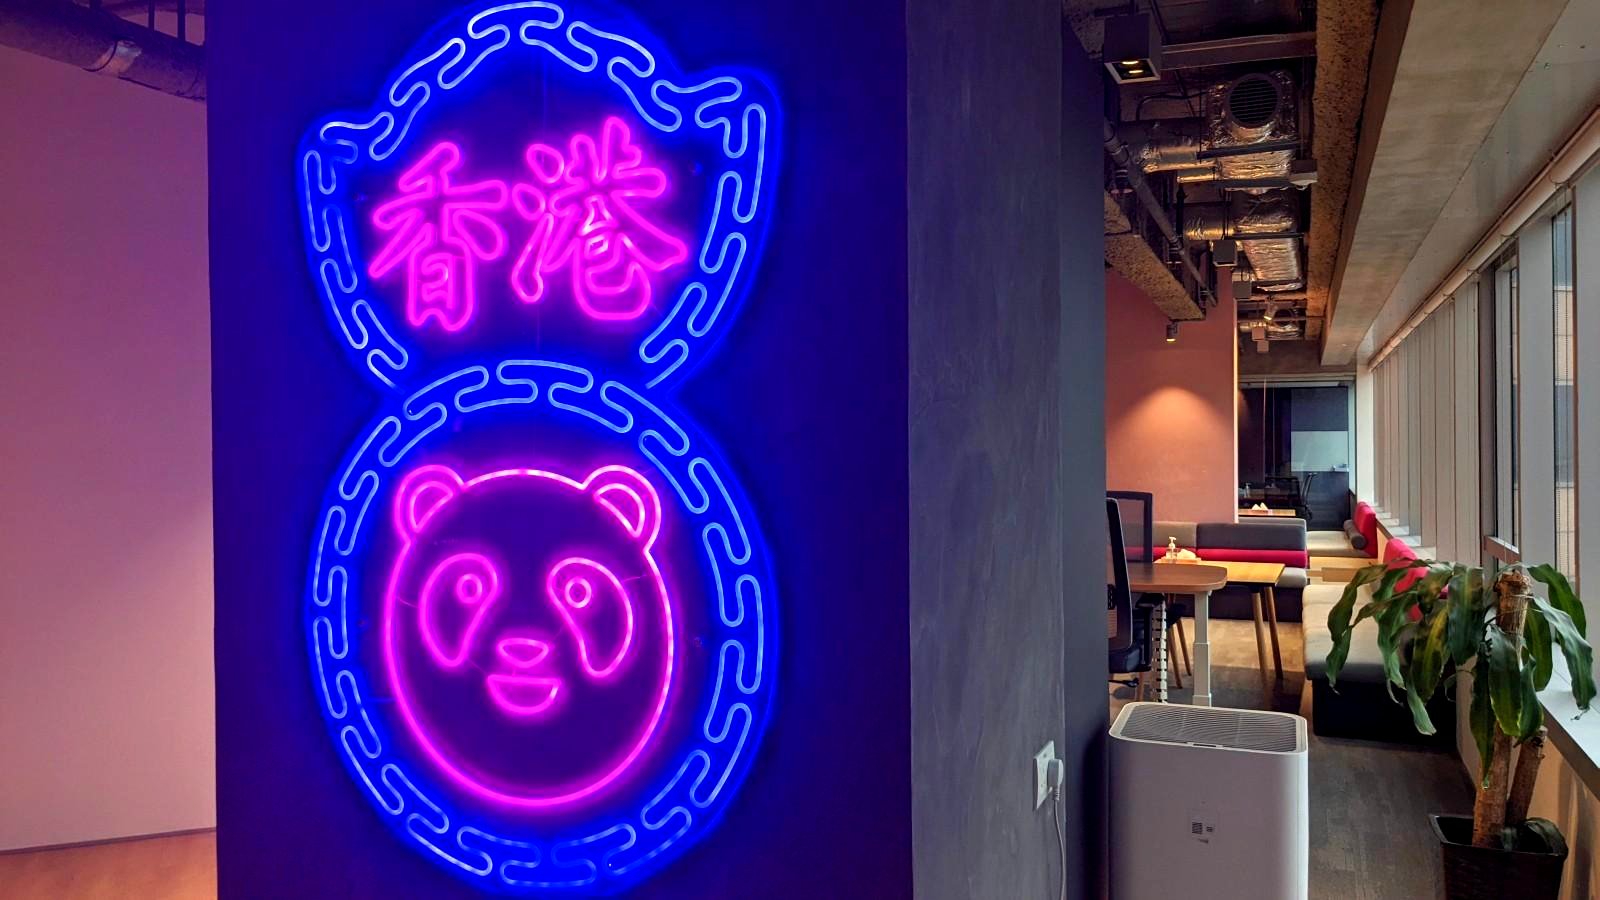 From workplace environment to company culture: foodpanda’s winning formula